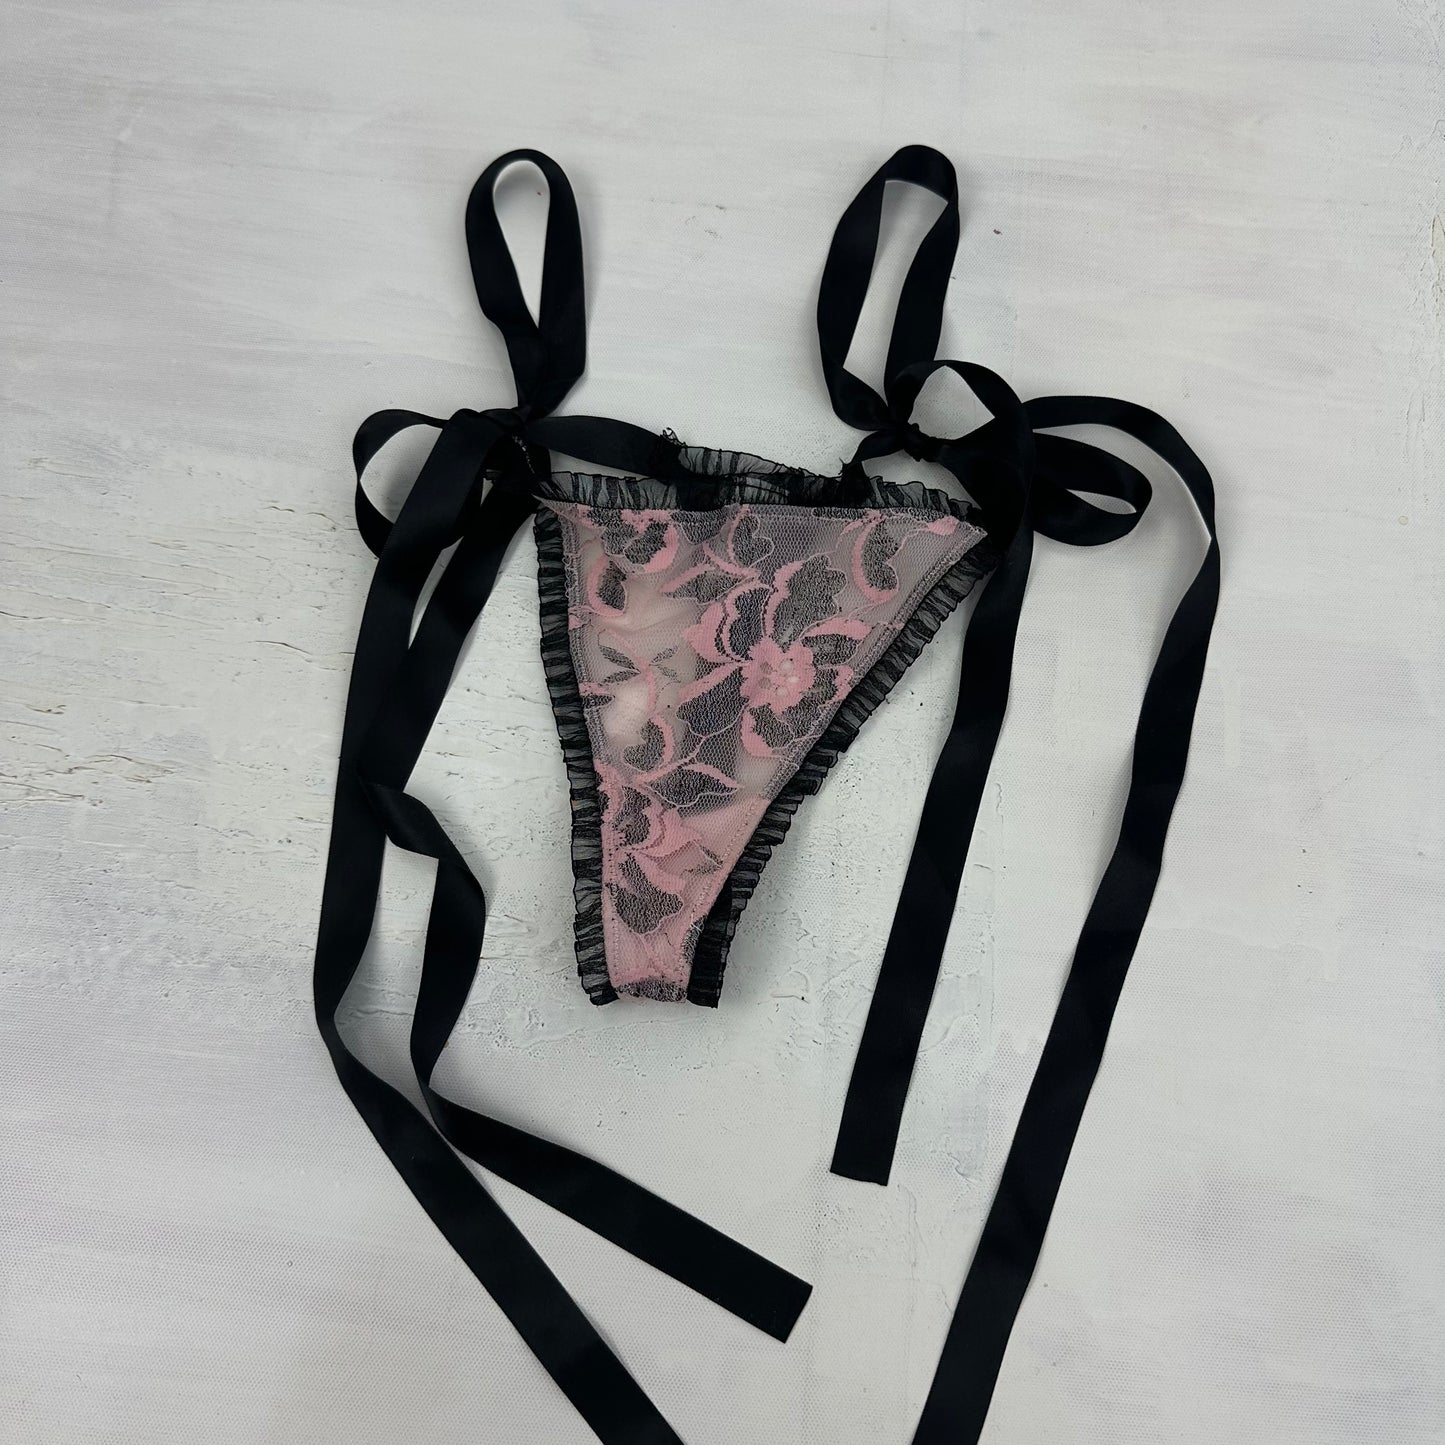 ADDISON RAE DROP | small black and pink lace underwear with bow side ties